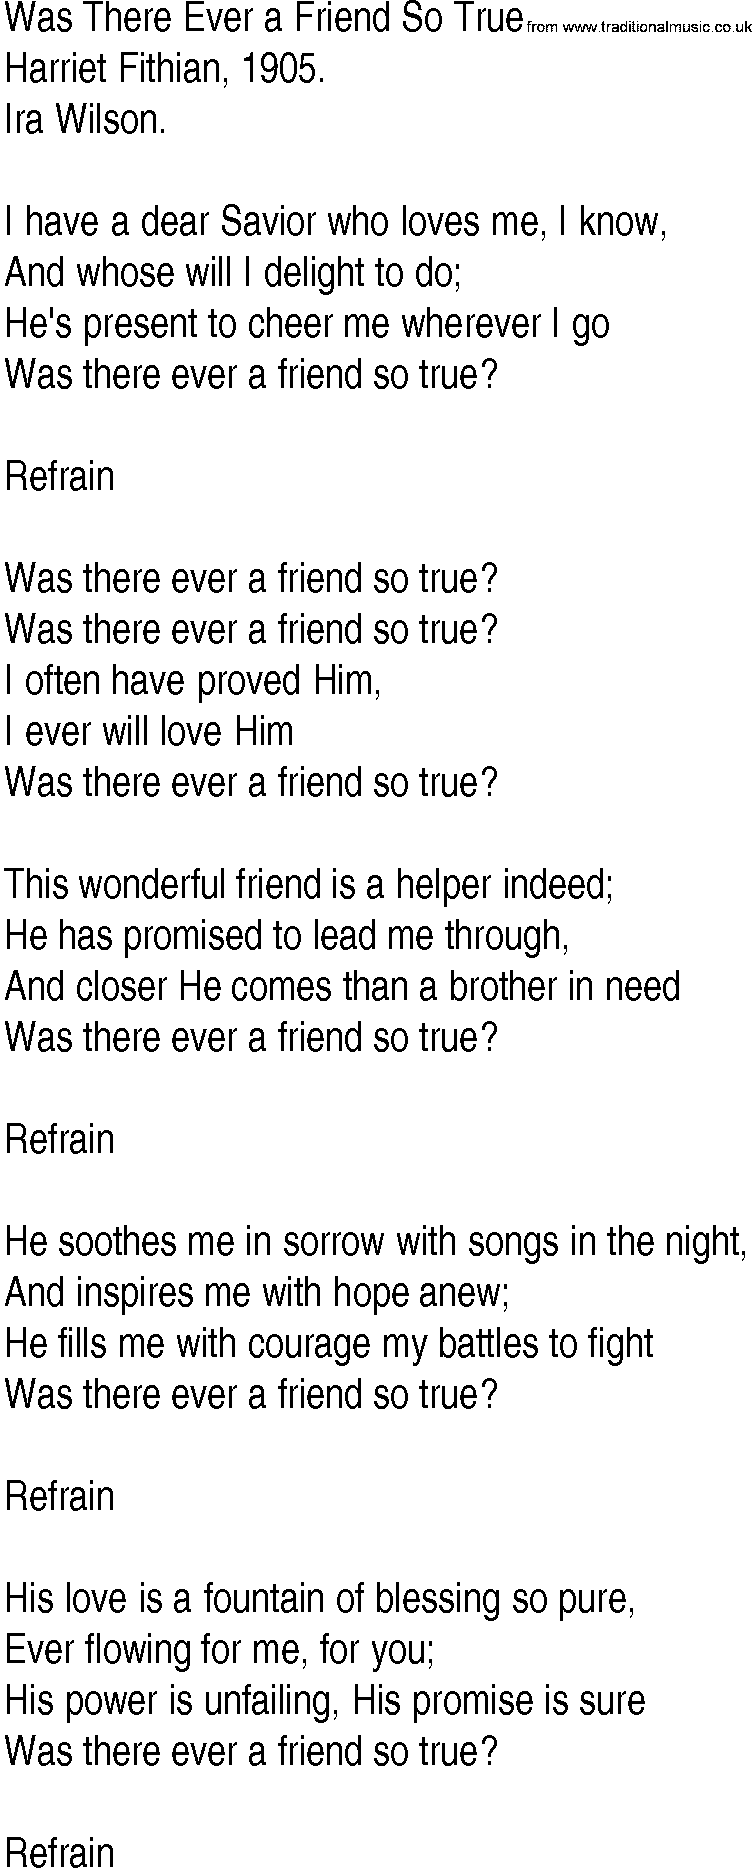 Hymn and Gospel Song: Was There Ever a Friend So True by Harriet Fithian lyrics